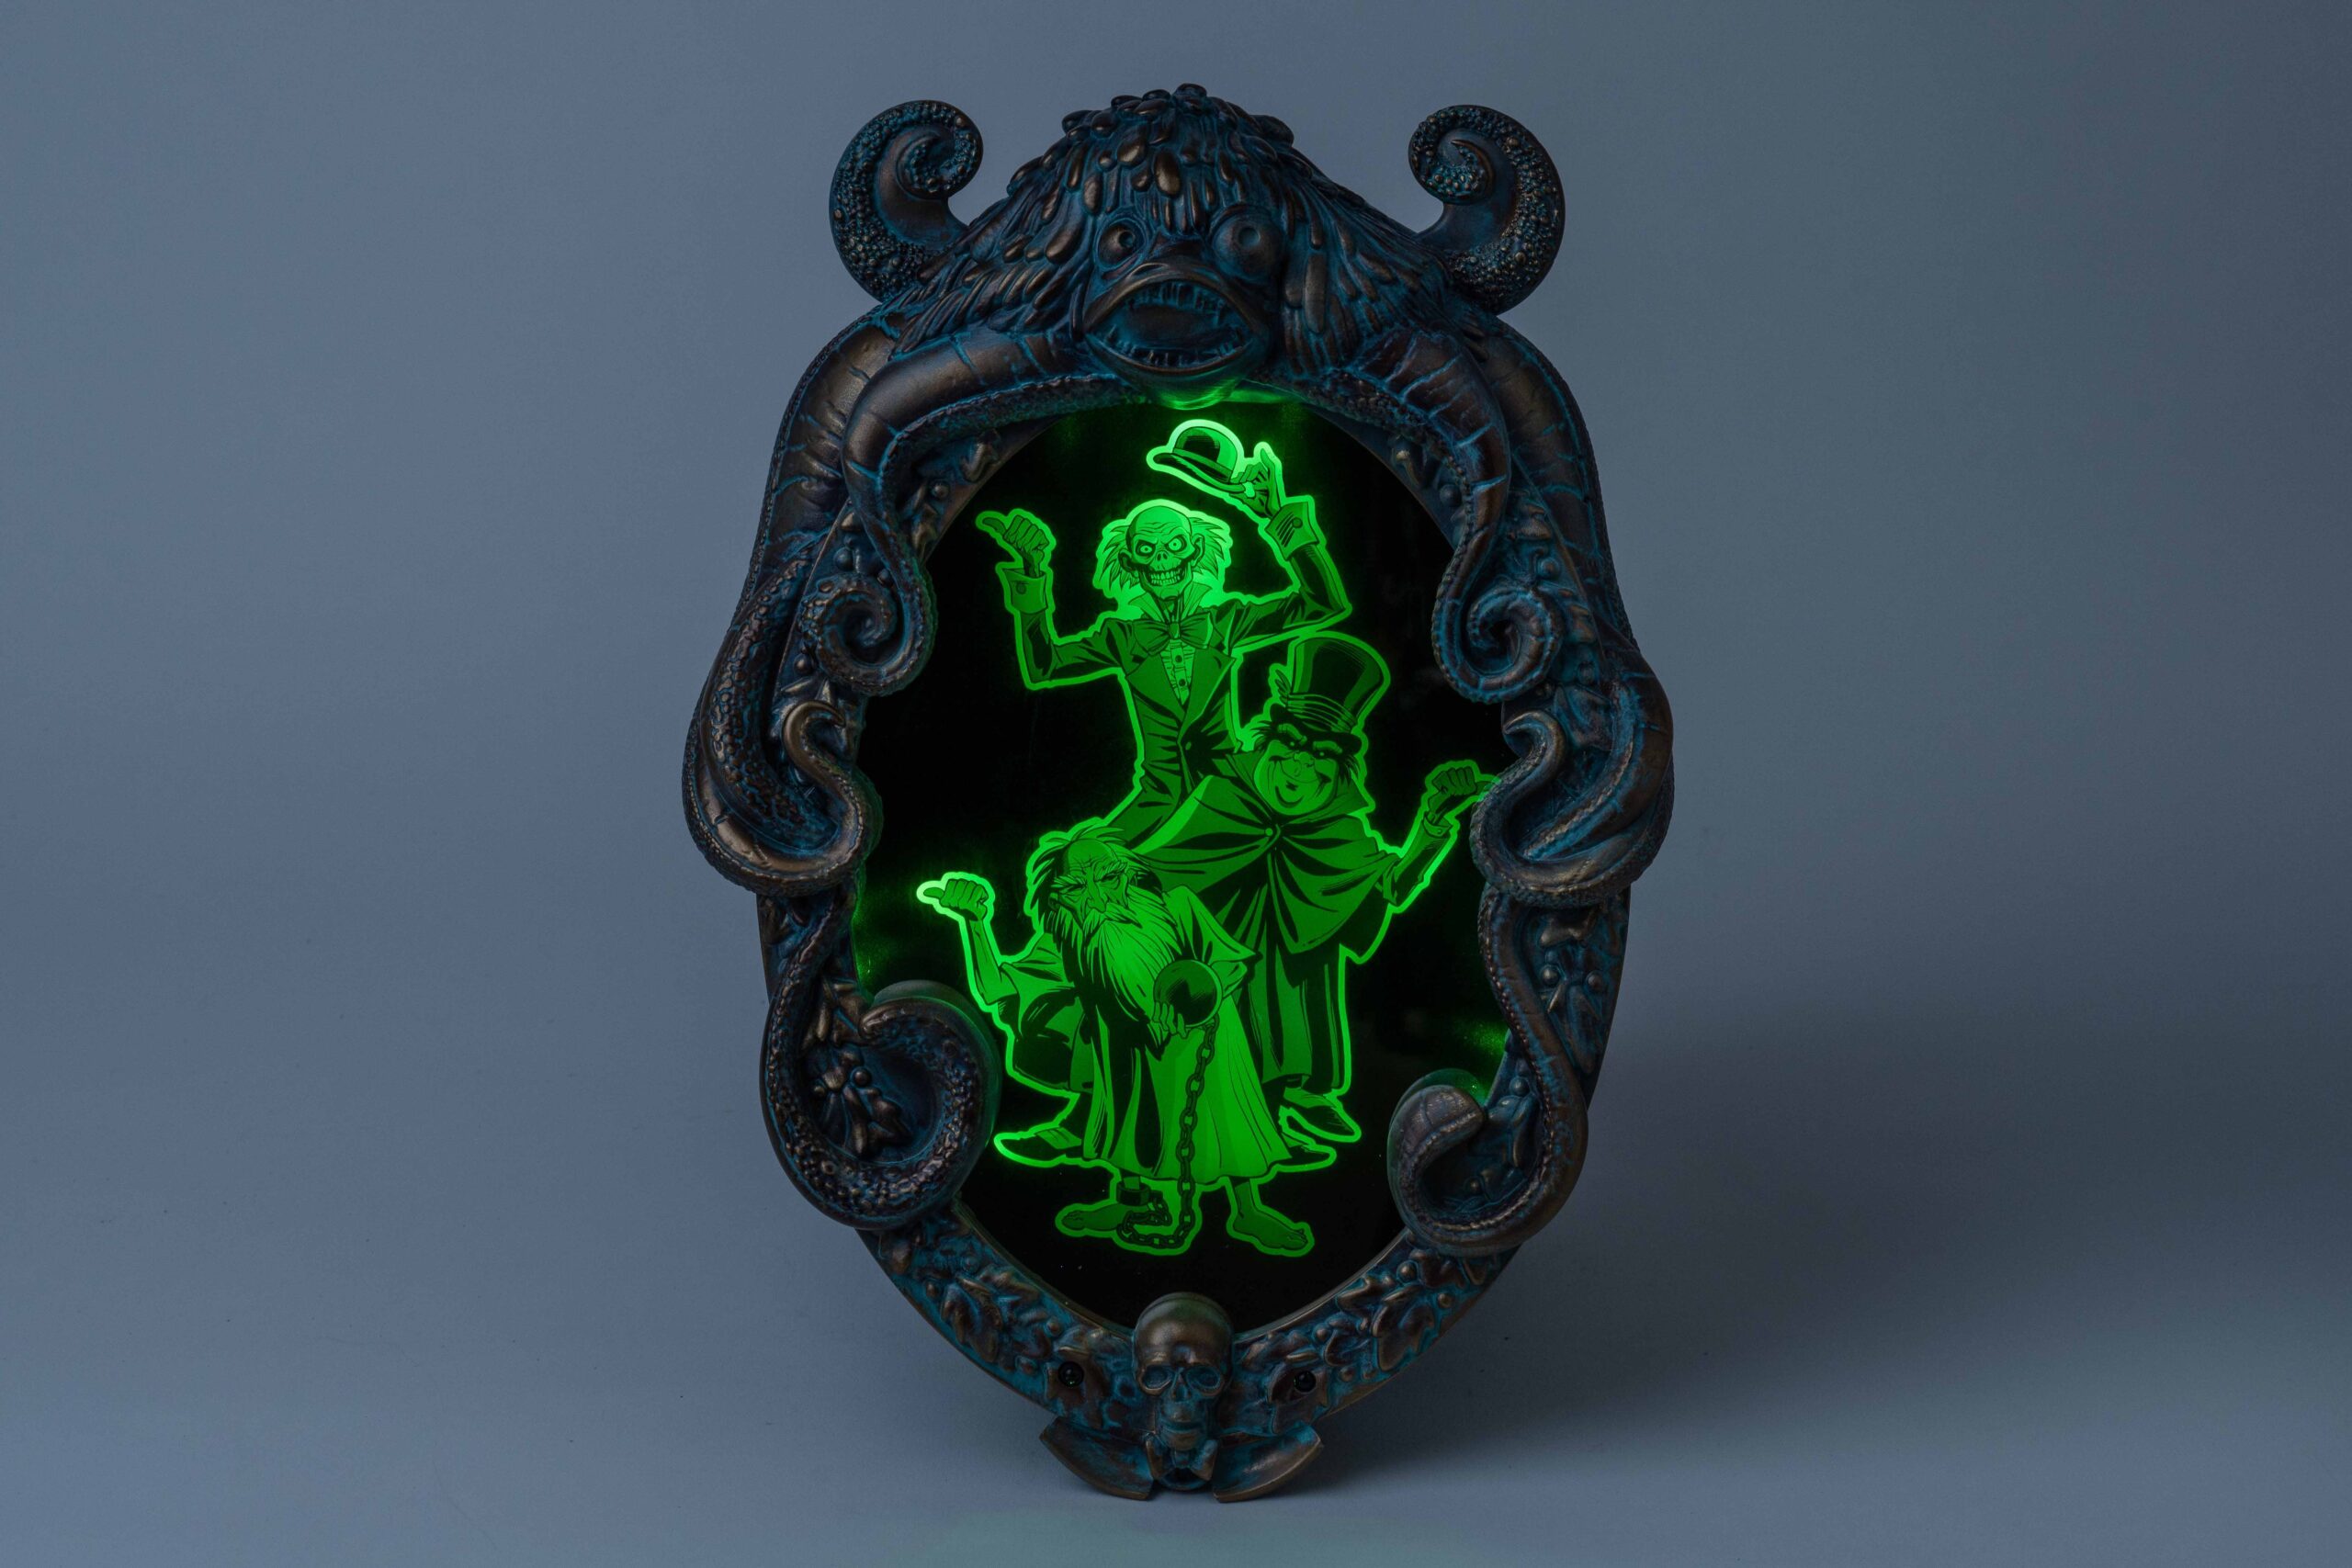 The Haunted Mansion Parlor Mirror will allow Disney Cruise Line guests to take home a piece of the magic, offering a ghoulish surprise to unsuspecting users when the hitchhiking ghosts mysteriously appear. (Steven Diaz, Photographer) ©Disney